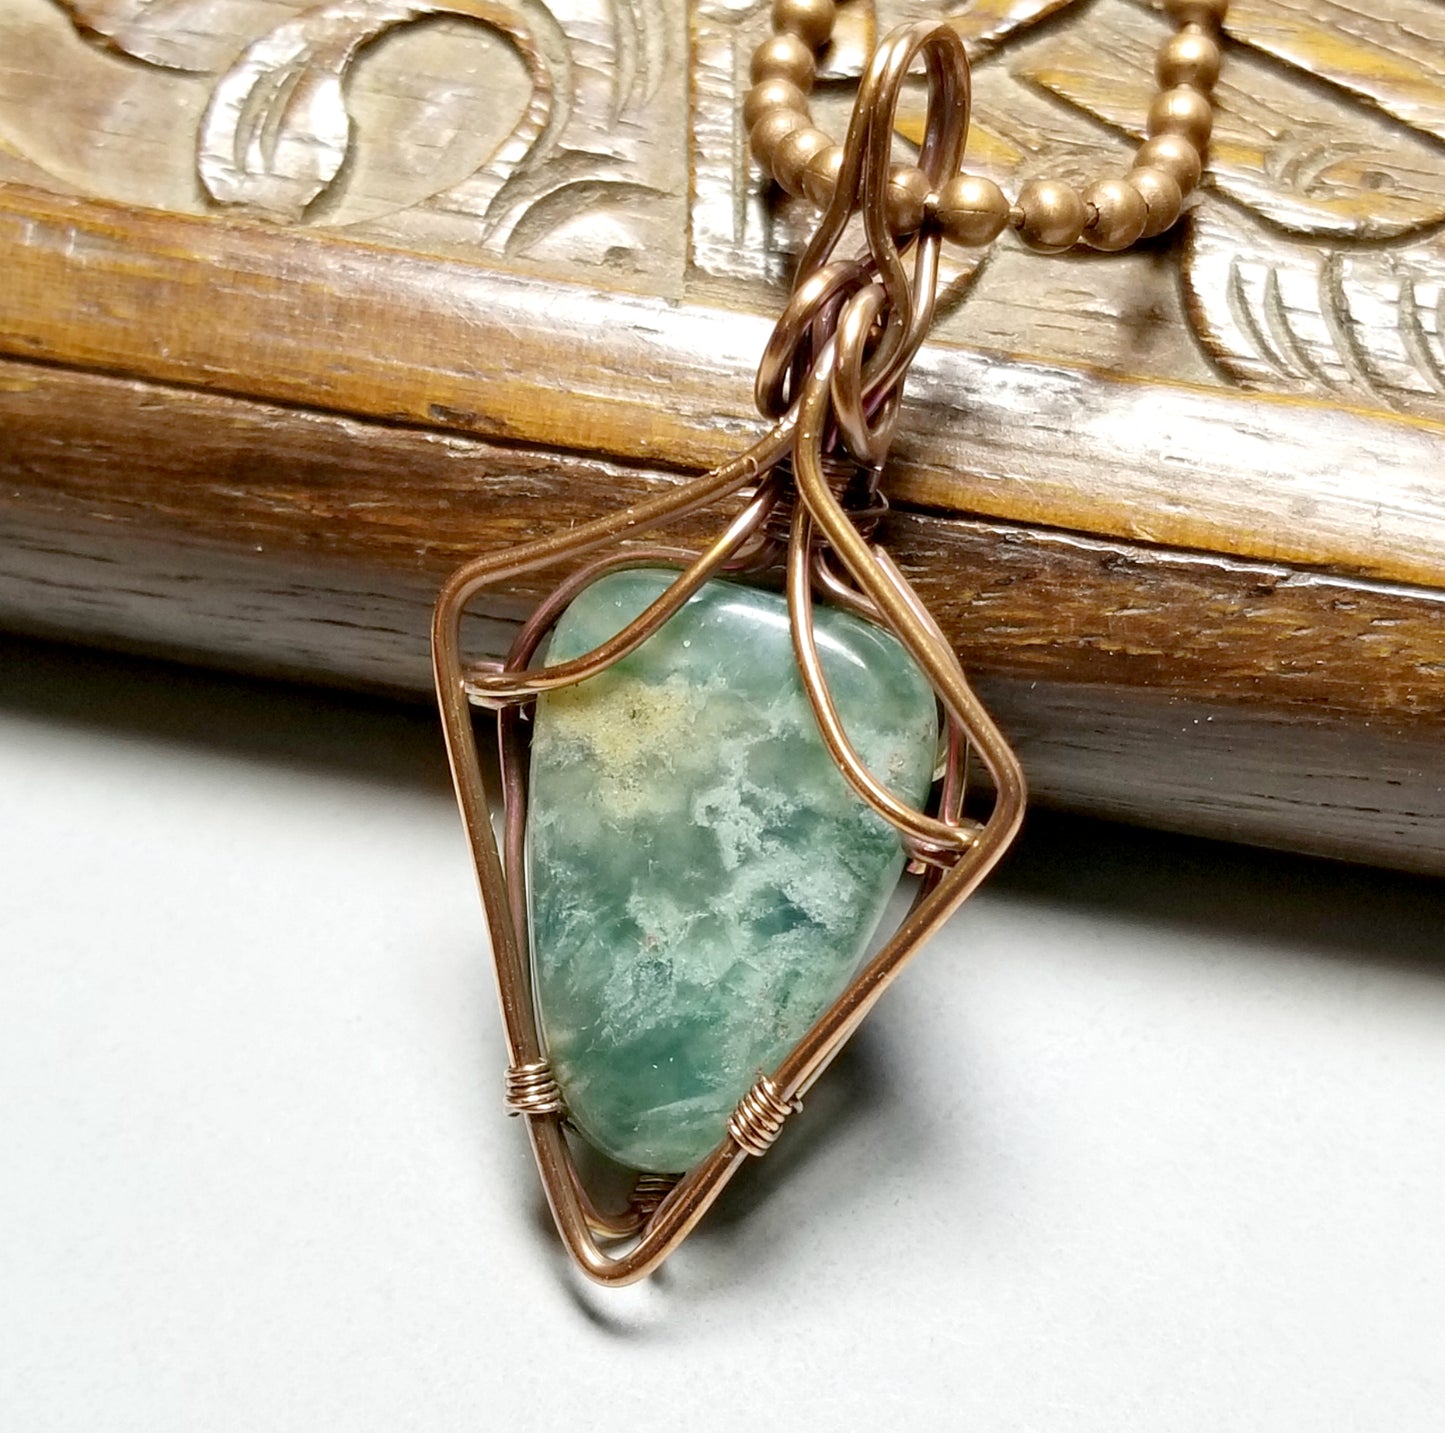 Chrysocolla Stone Necklace, Wire Wrapped Pendant, Green Gemstone Jewelry